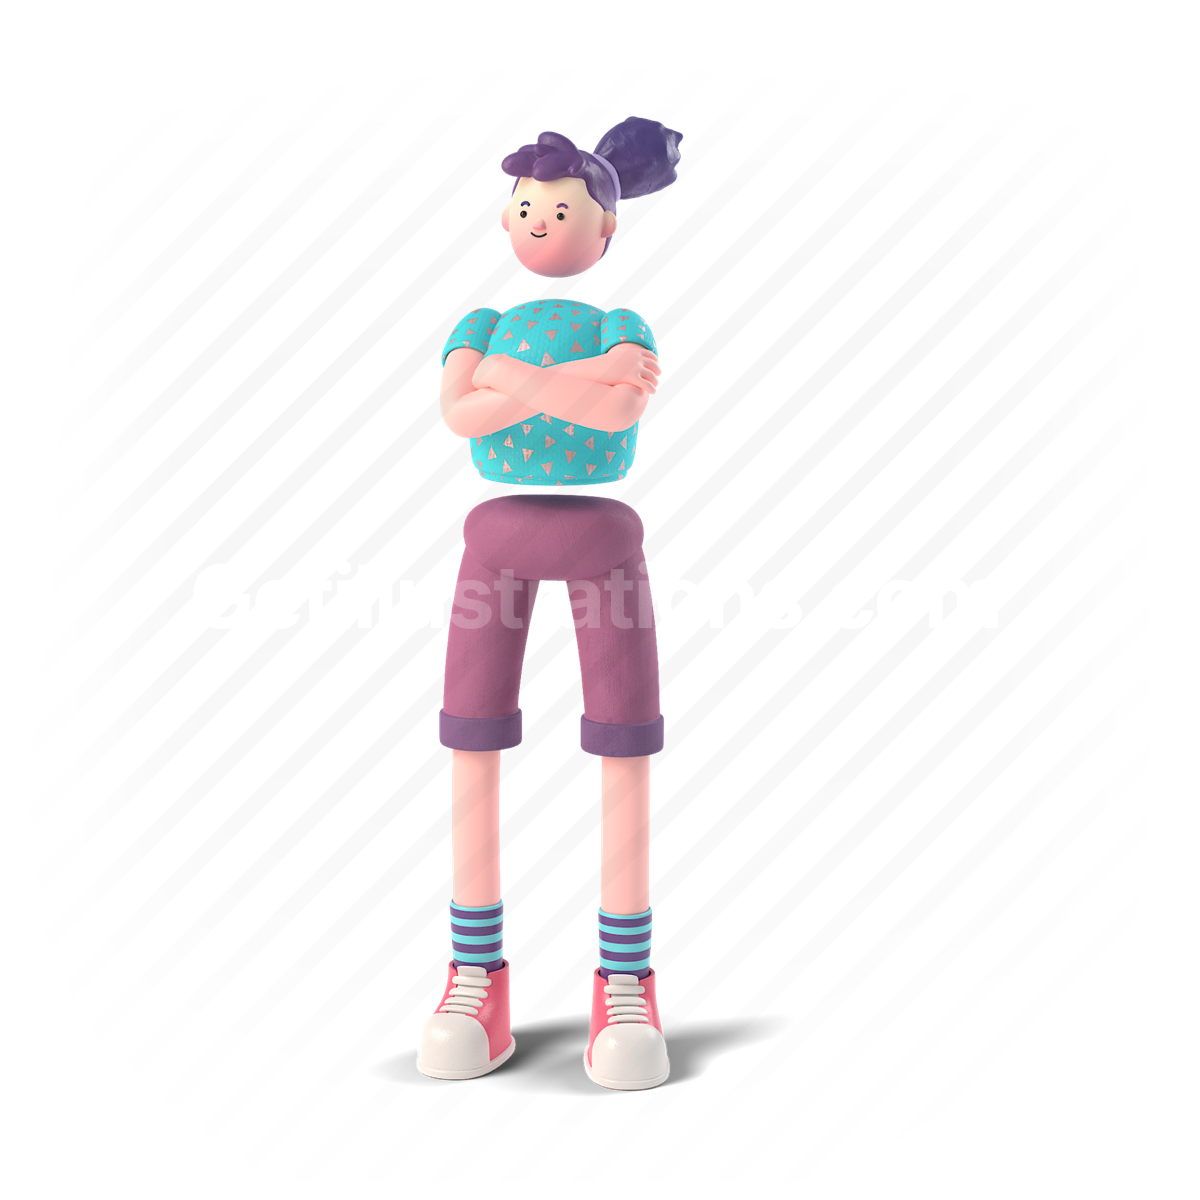 woman, pixie, glitter, 3d, people, character, stand, arms crossed